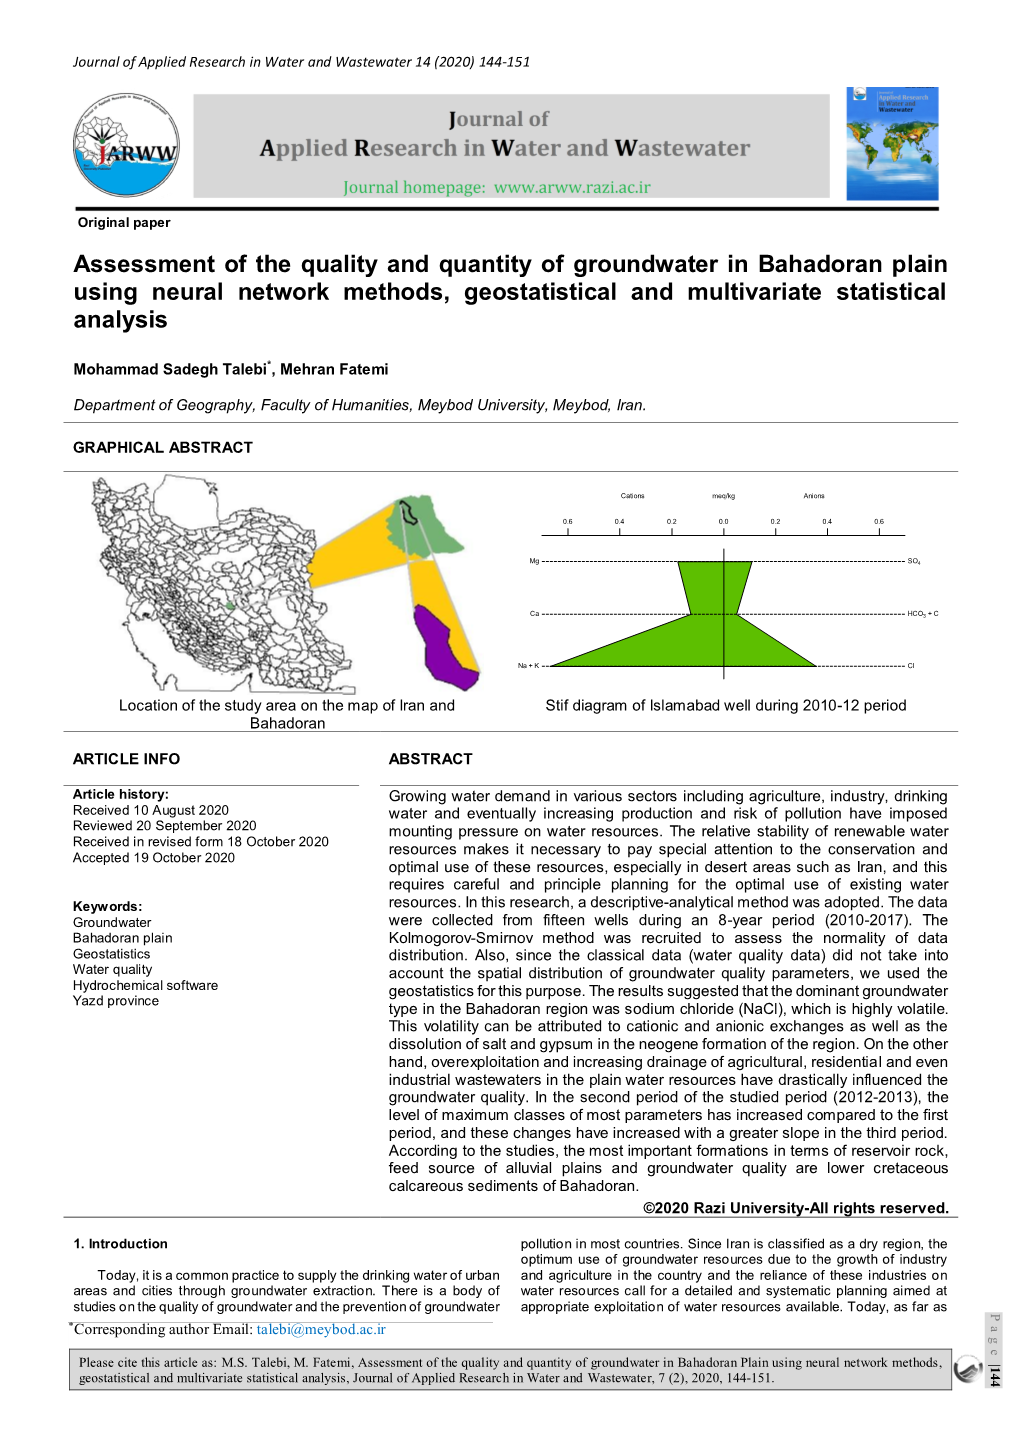 Assessment of the Quality and Quantity of Groundwater in Bahadoran Plain Using Neural Network Methods, Geostatistical and Multivariate Statistical Analysis